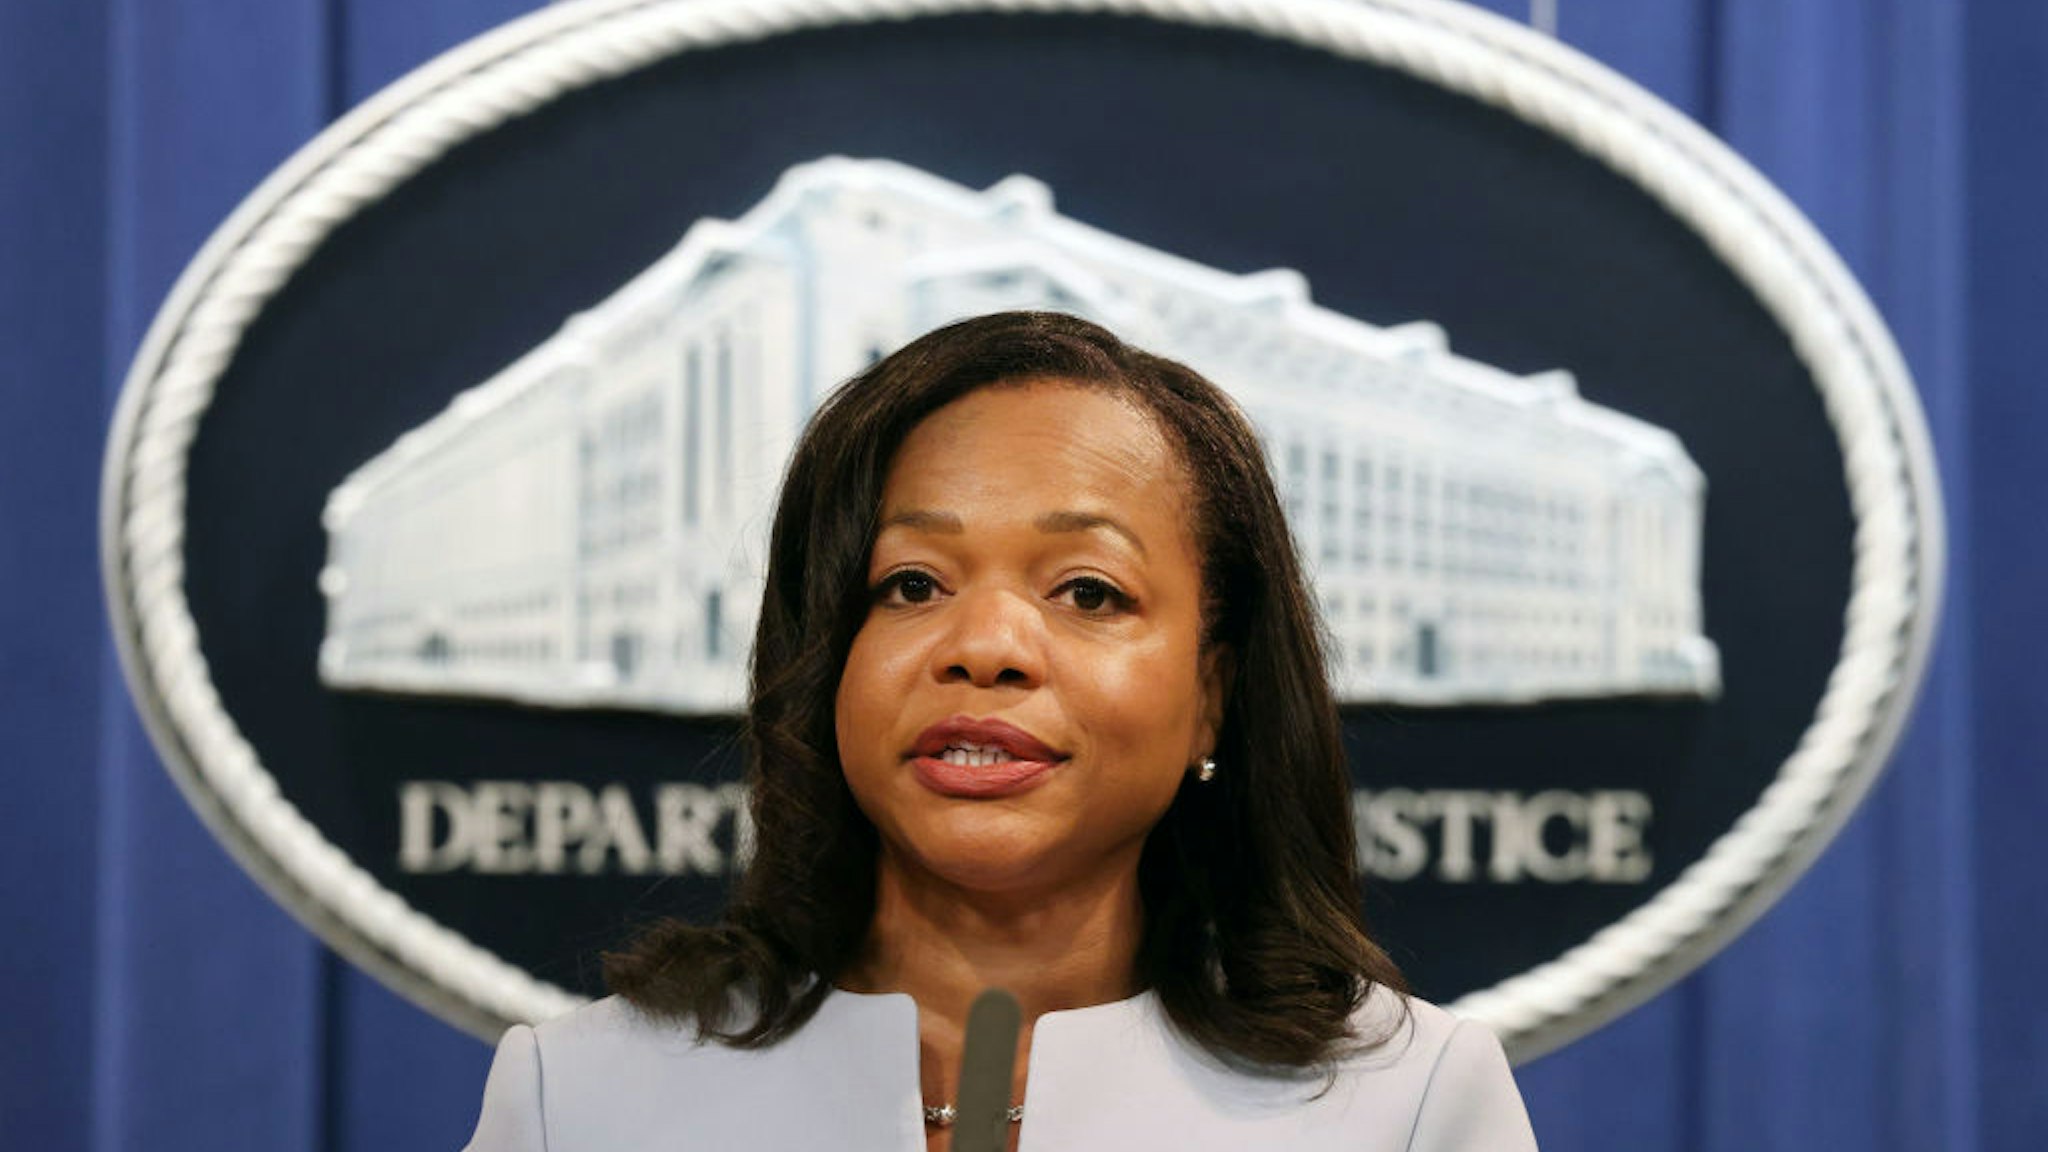 WASHINGTON, DC - AUGUST 05: U.S. Assistant Attorney General for the Civil Rights Division Kristen Clarke speaks on a federal investigation of the City of Phoenix and the Phoenix Police Department during a news conference at the Department of Justice on August 05, 2021 in Washington, DC. Attorney General Merrick Garland said the Justice Department has opened a pattern or practice investigation into the City of Phoenix and the Phoenix Police Department to determine if they have violated federal laws or citizens constitutional rights. (Photo by Kevin Dietsch/Getty Images)